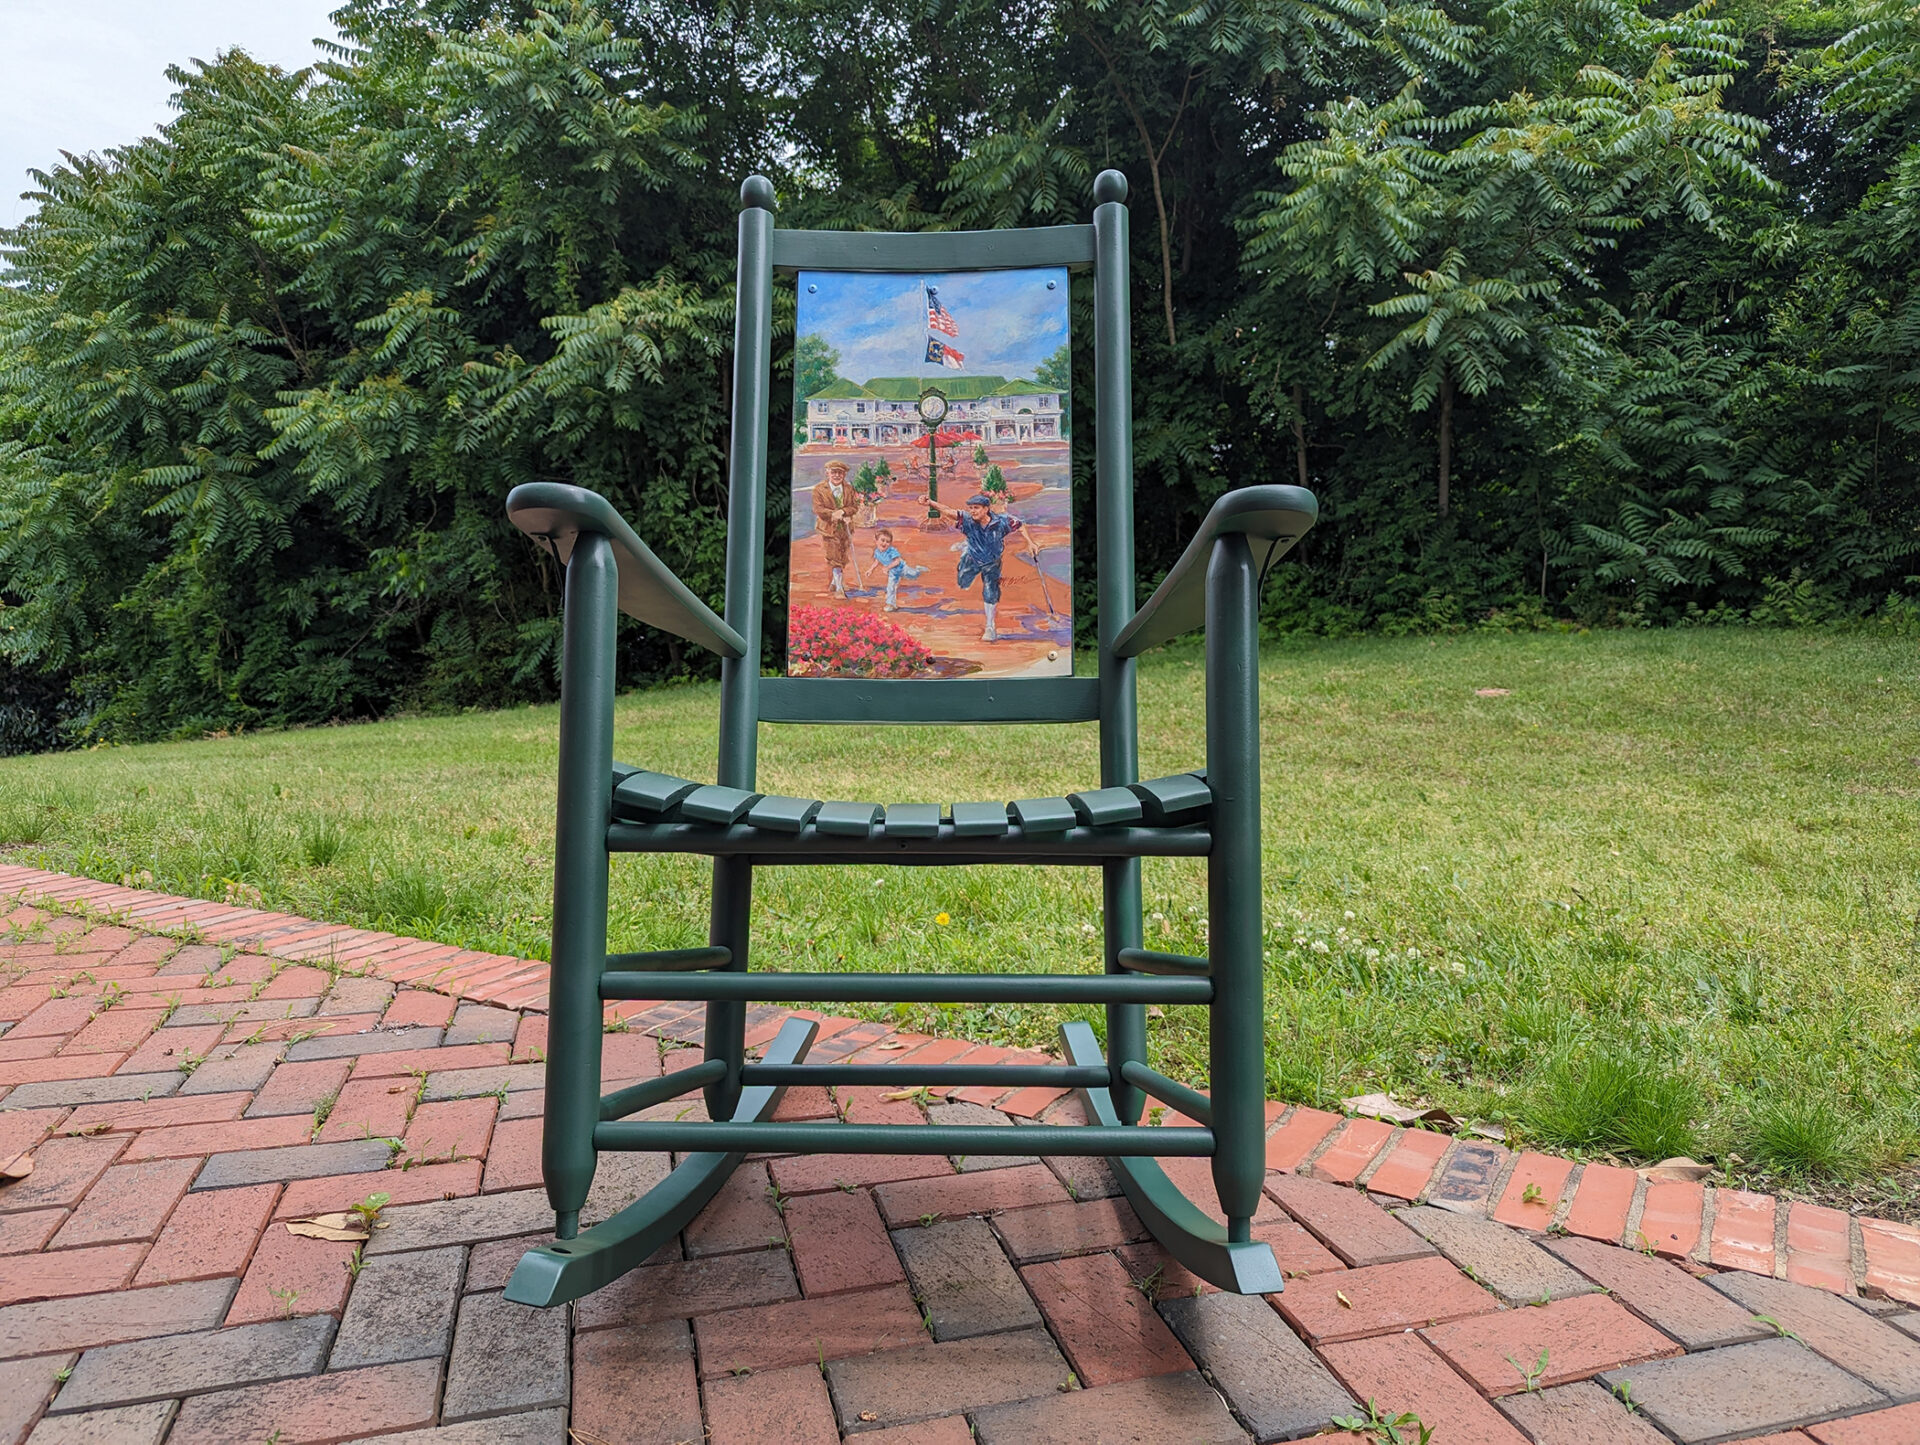 A Rock the Village rocking chair that is painted with designs of Pinehurst, NC.